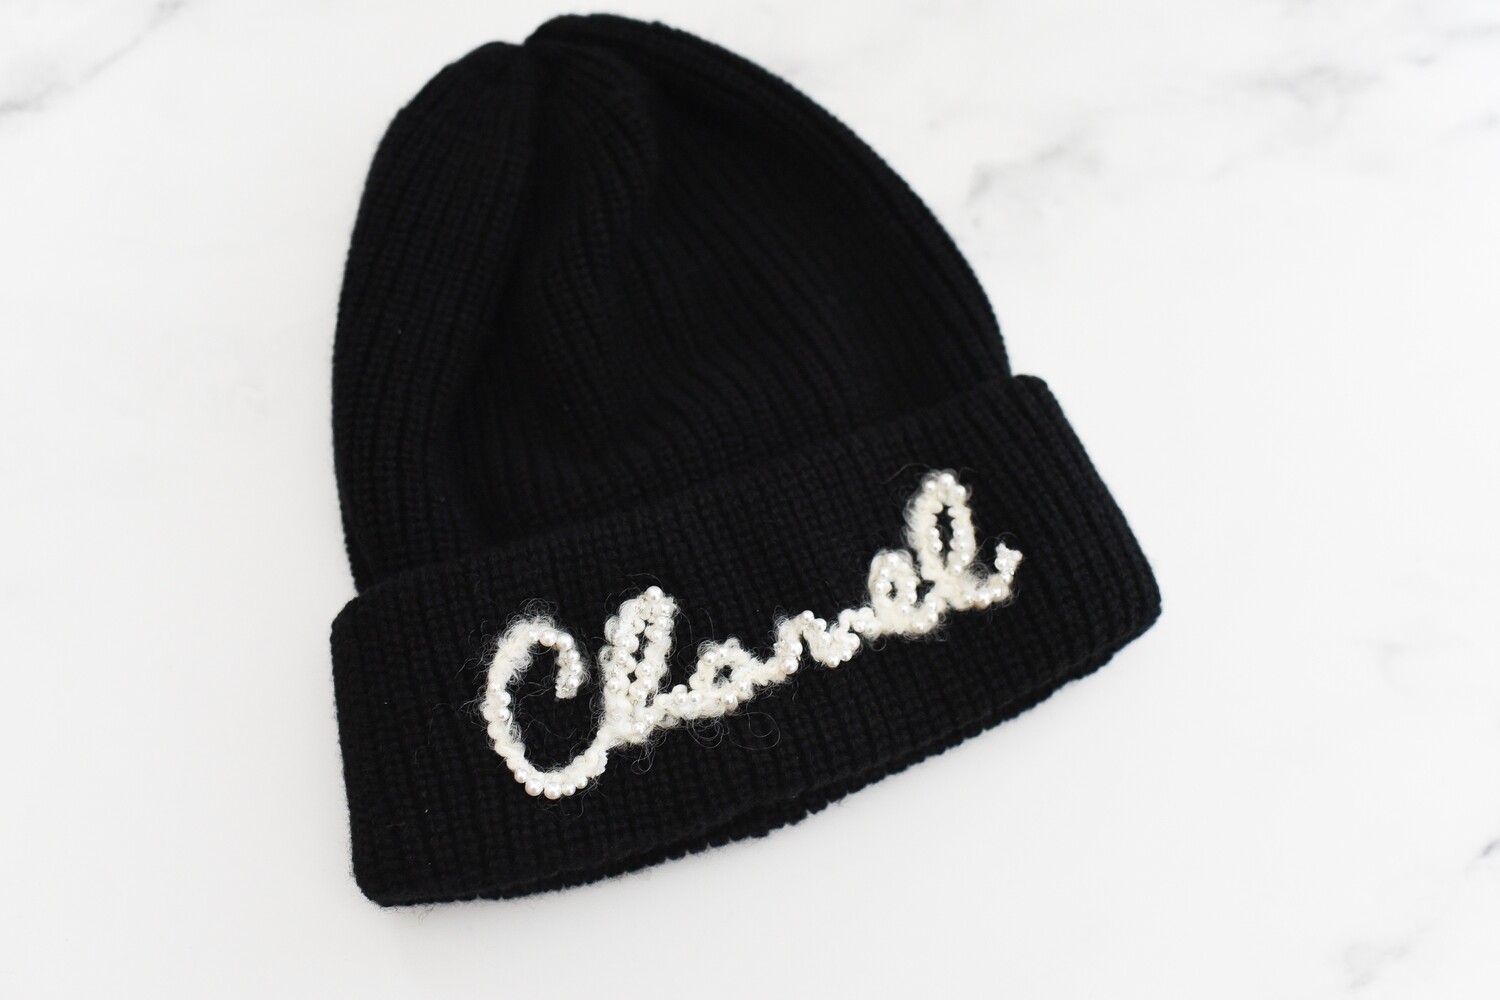 Chanel 100% Cashmere Beanie Hat with Pearls, Black and White, New